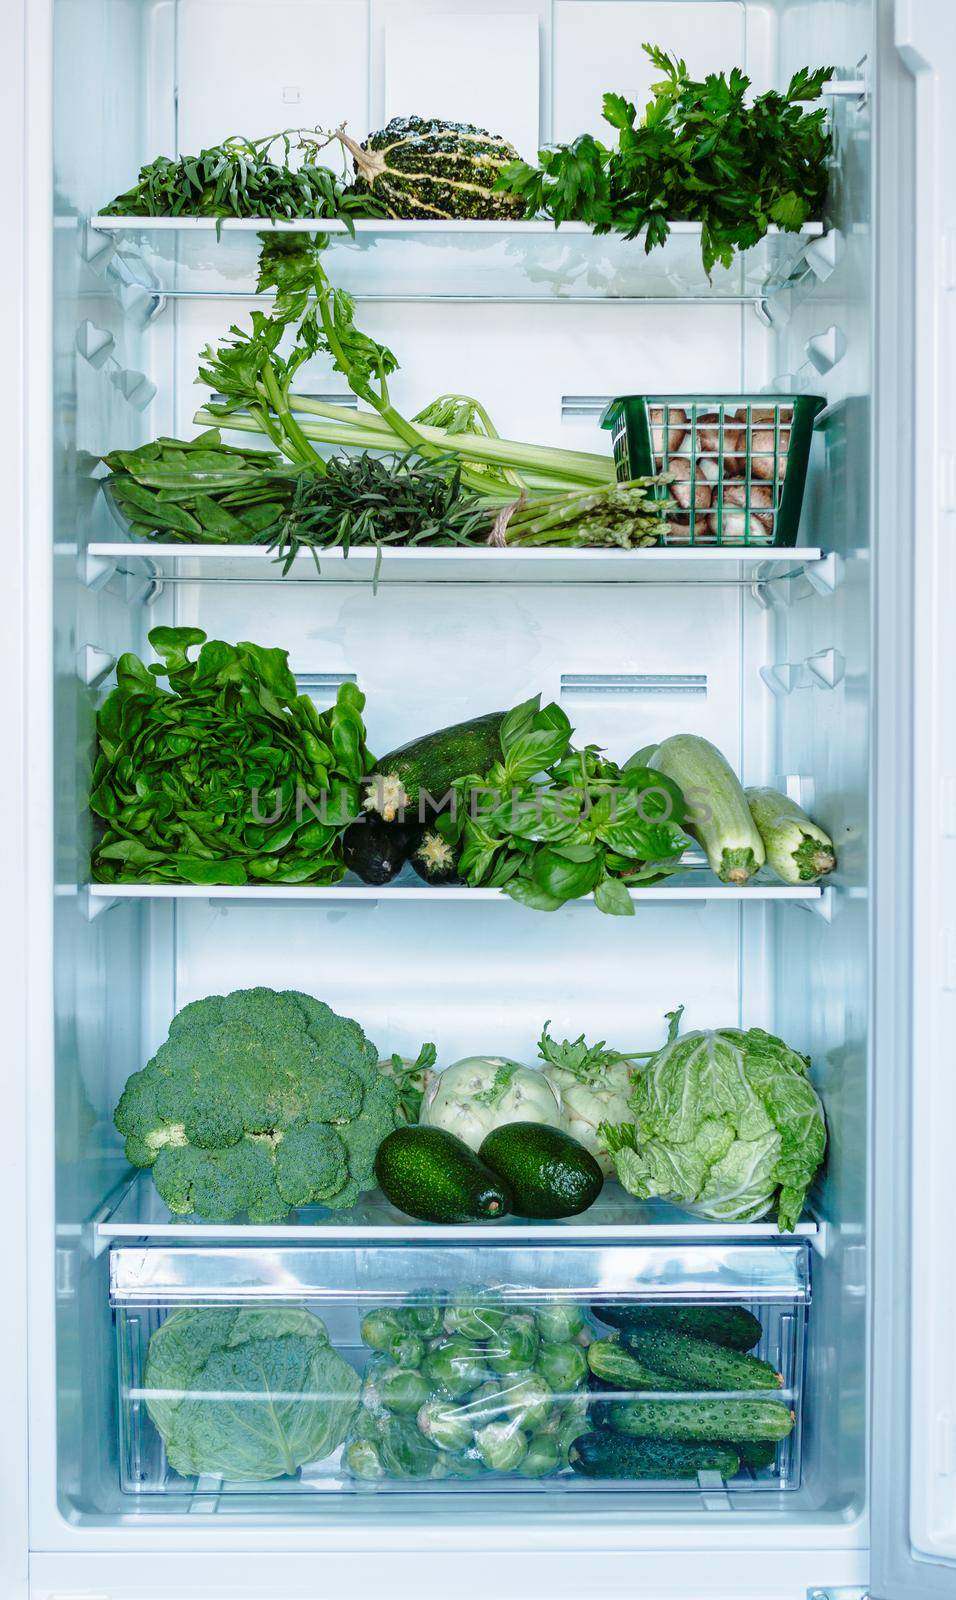 Green vegetables and greens in open refrigerator by fascinadora